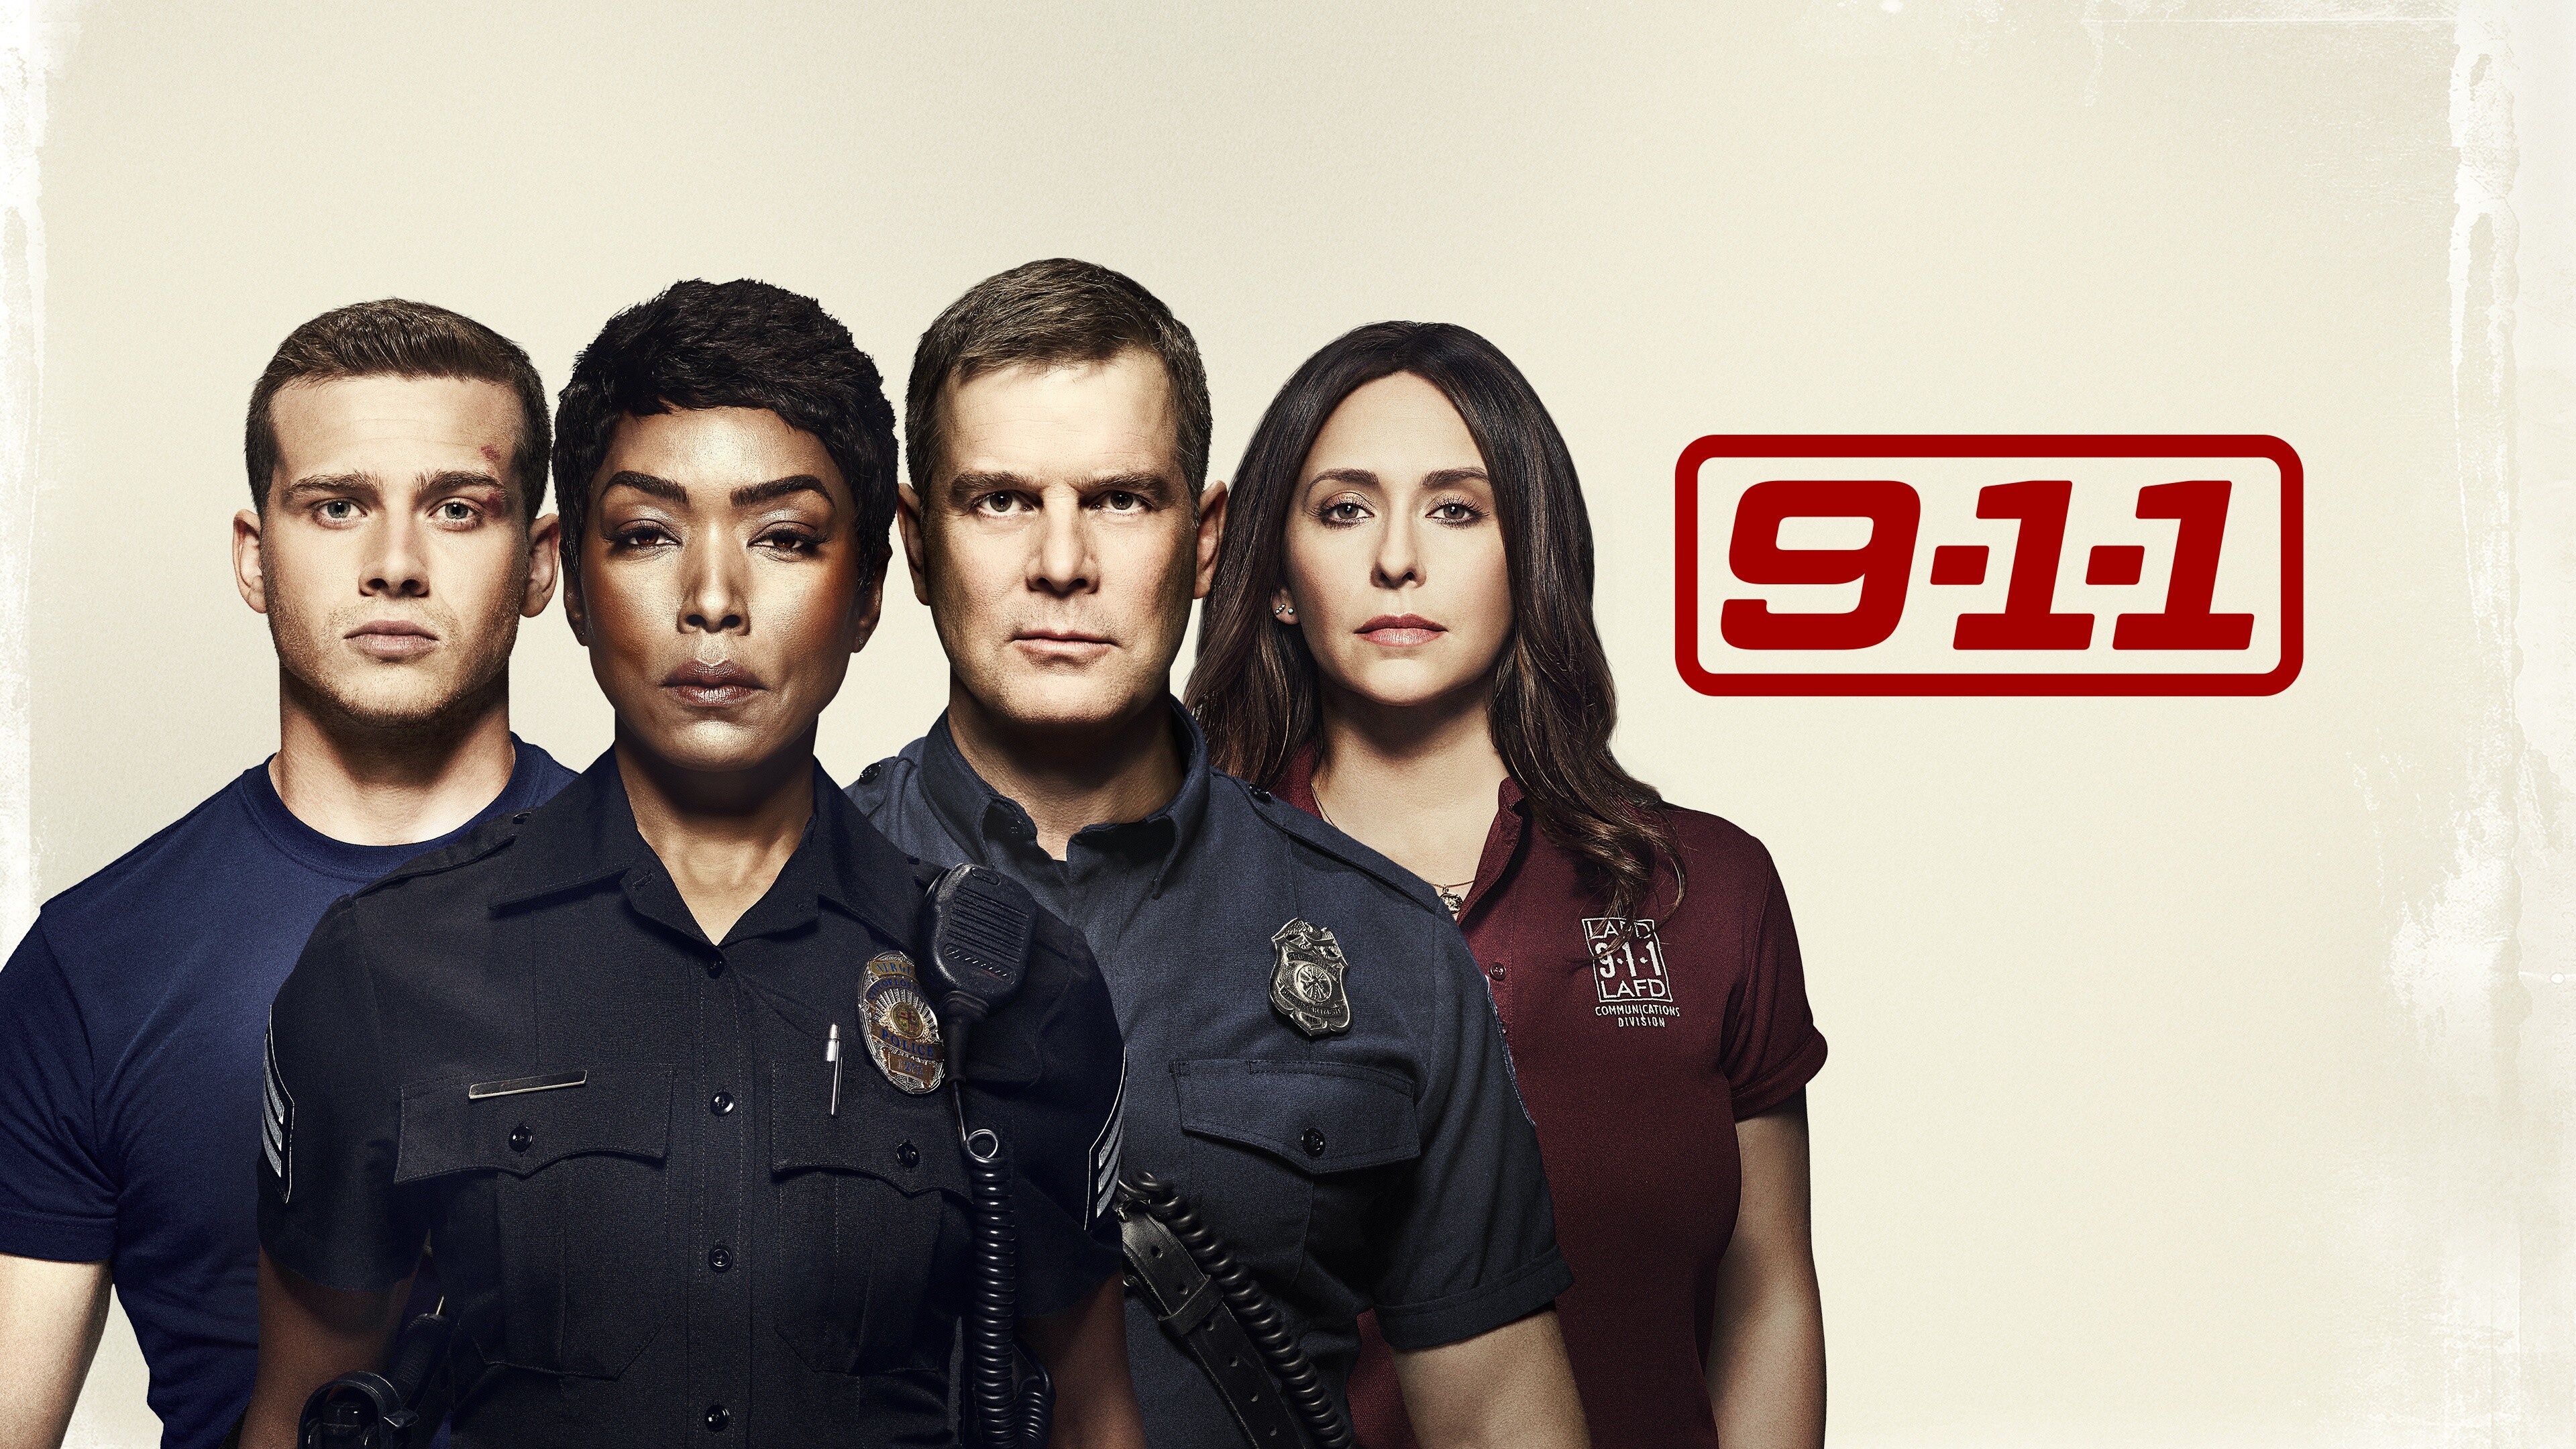 9-1-1 (TV Series): The Series Follows The Lives Of Los Angeles First Responders, Created By Ryan Murphy. 3840x2160 4K Wallpaper.